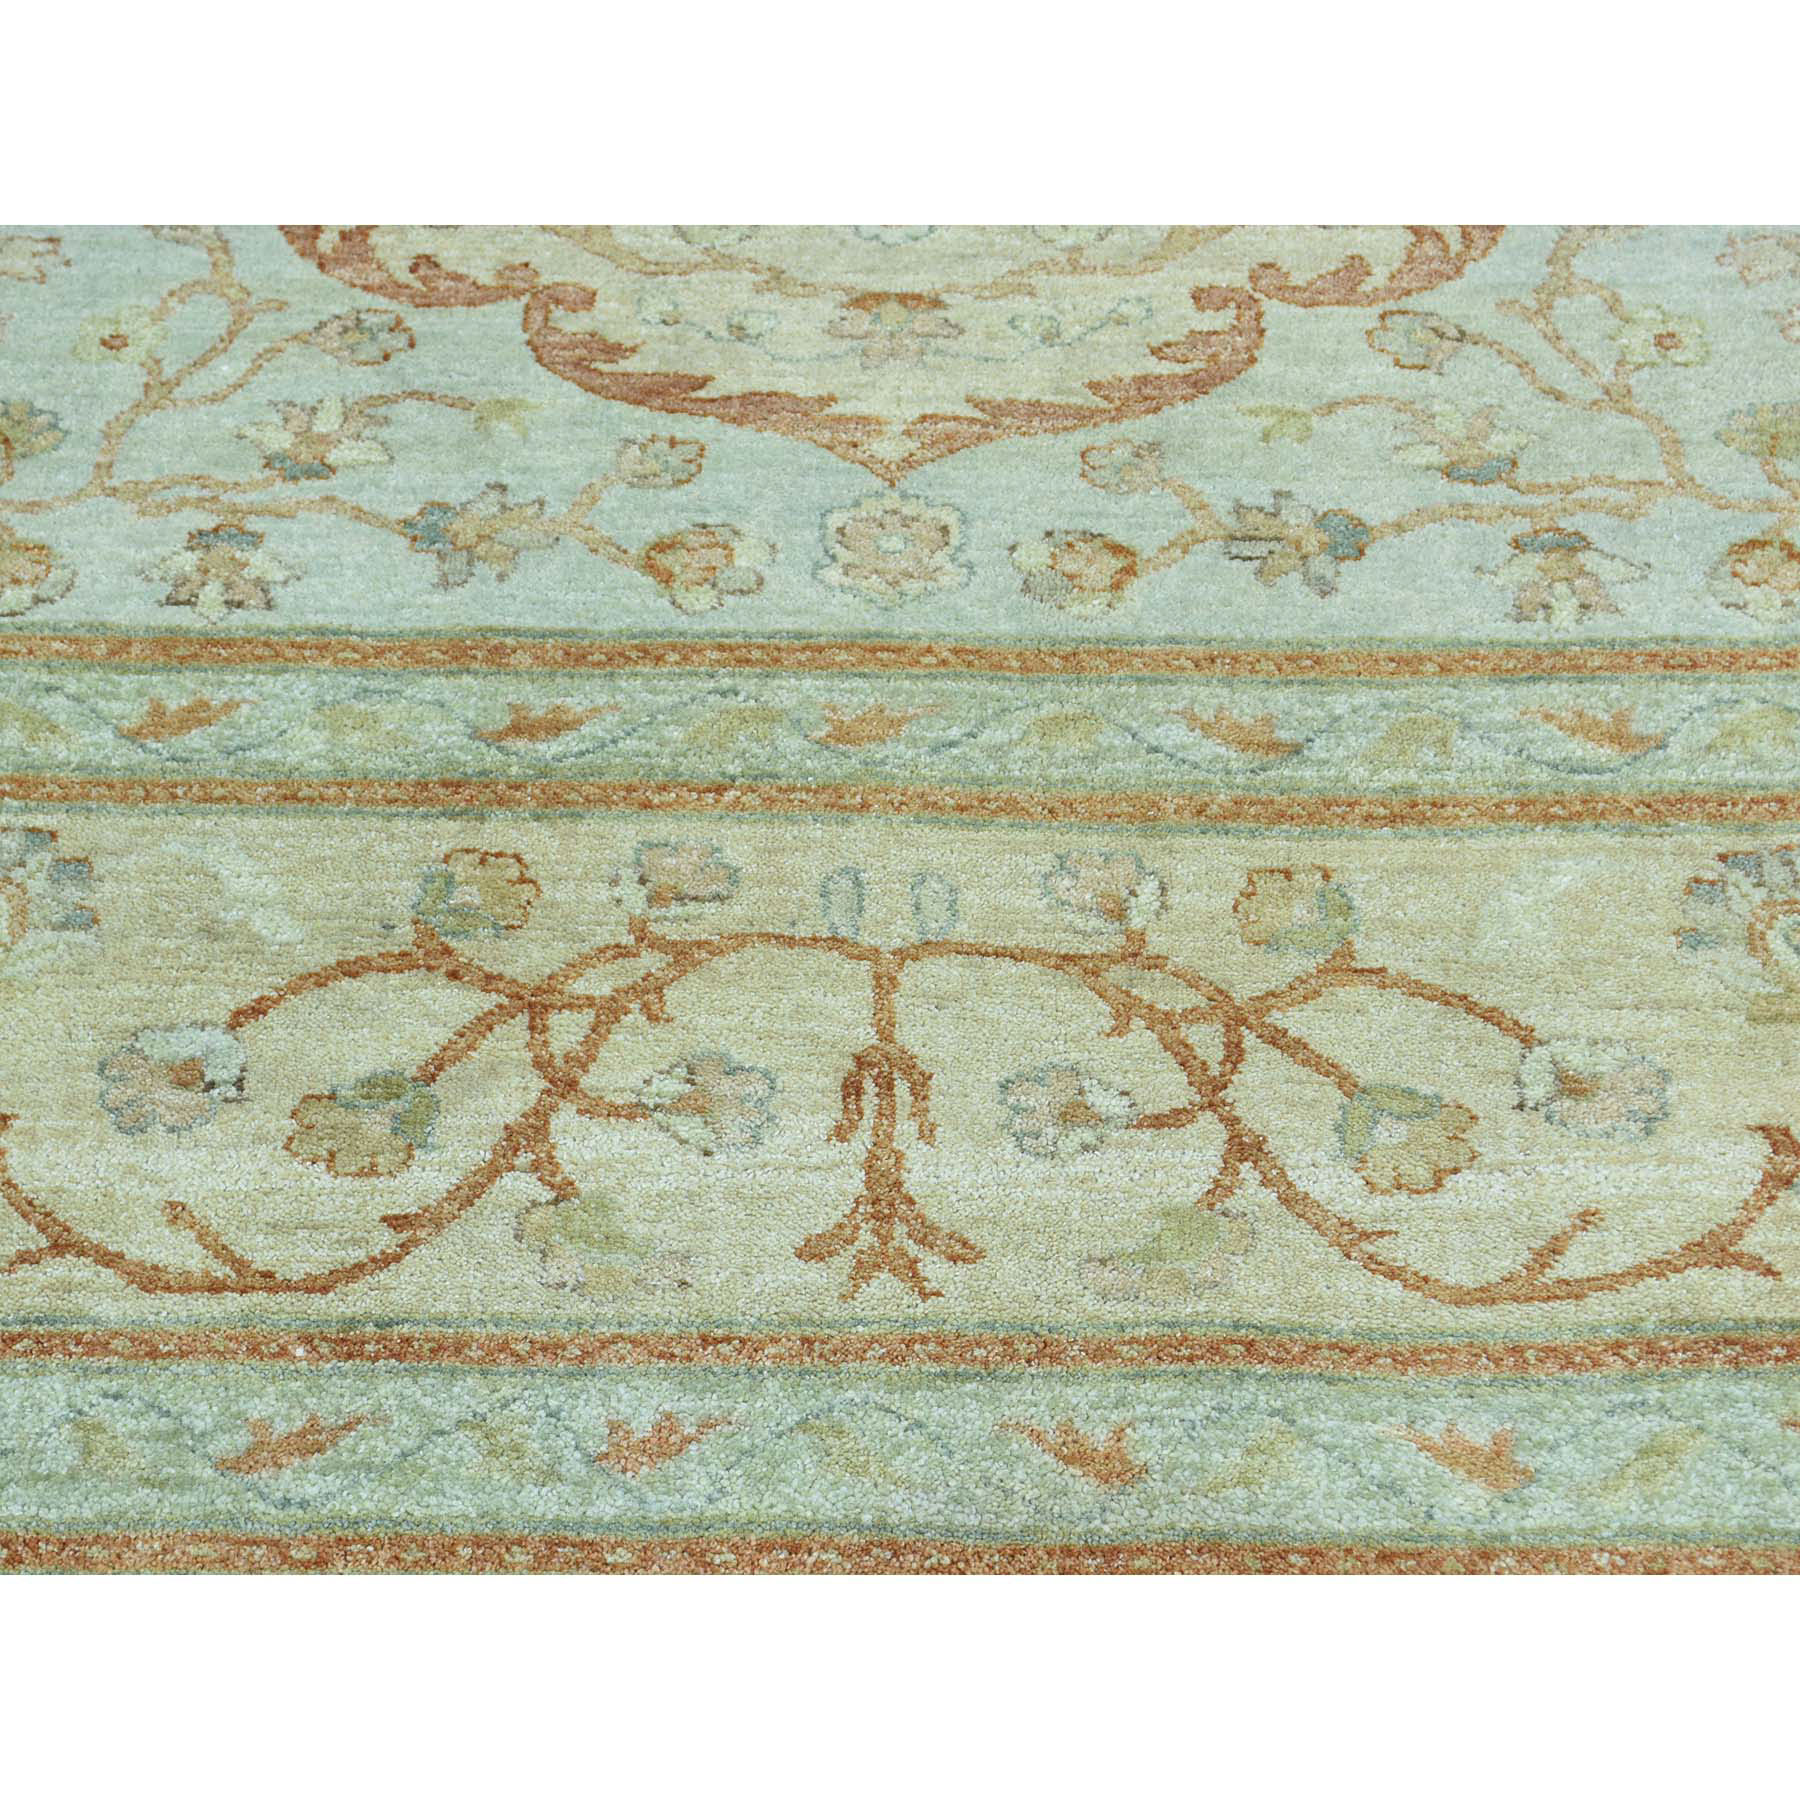 8-1 x10-5  Antiqued Tabriz with Pastel Colors Hand-Knotted Oriental Rug 